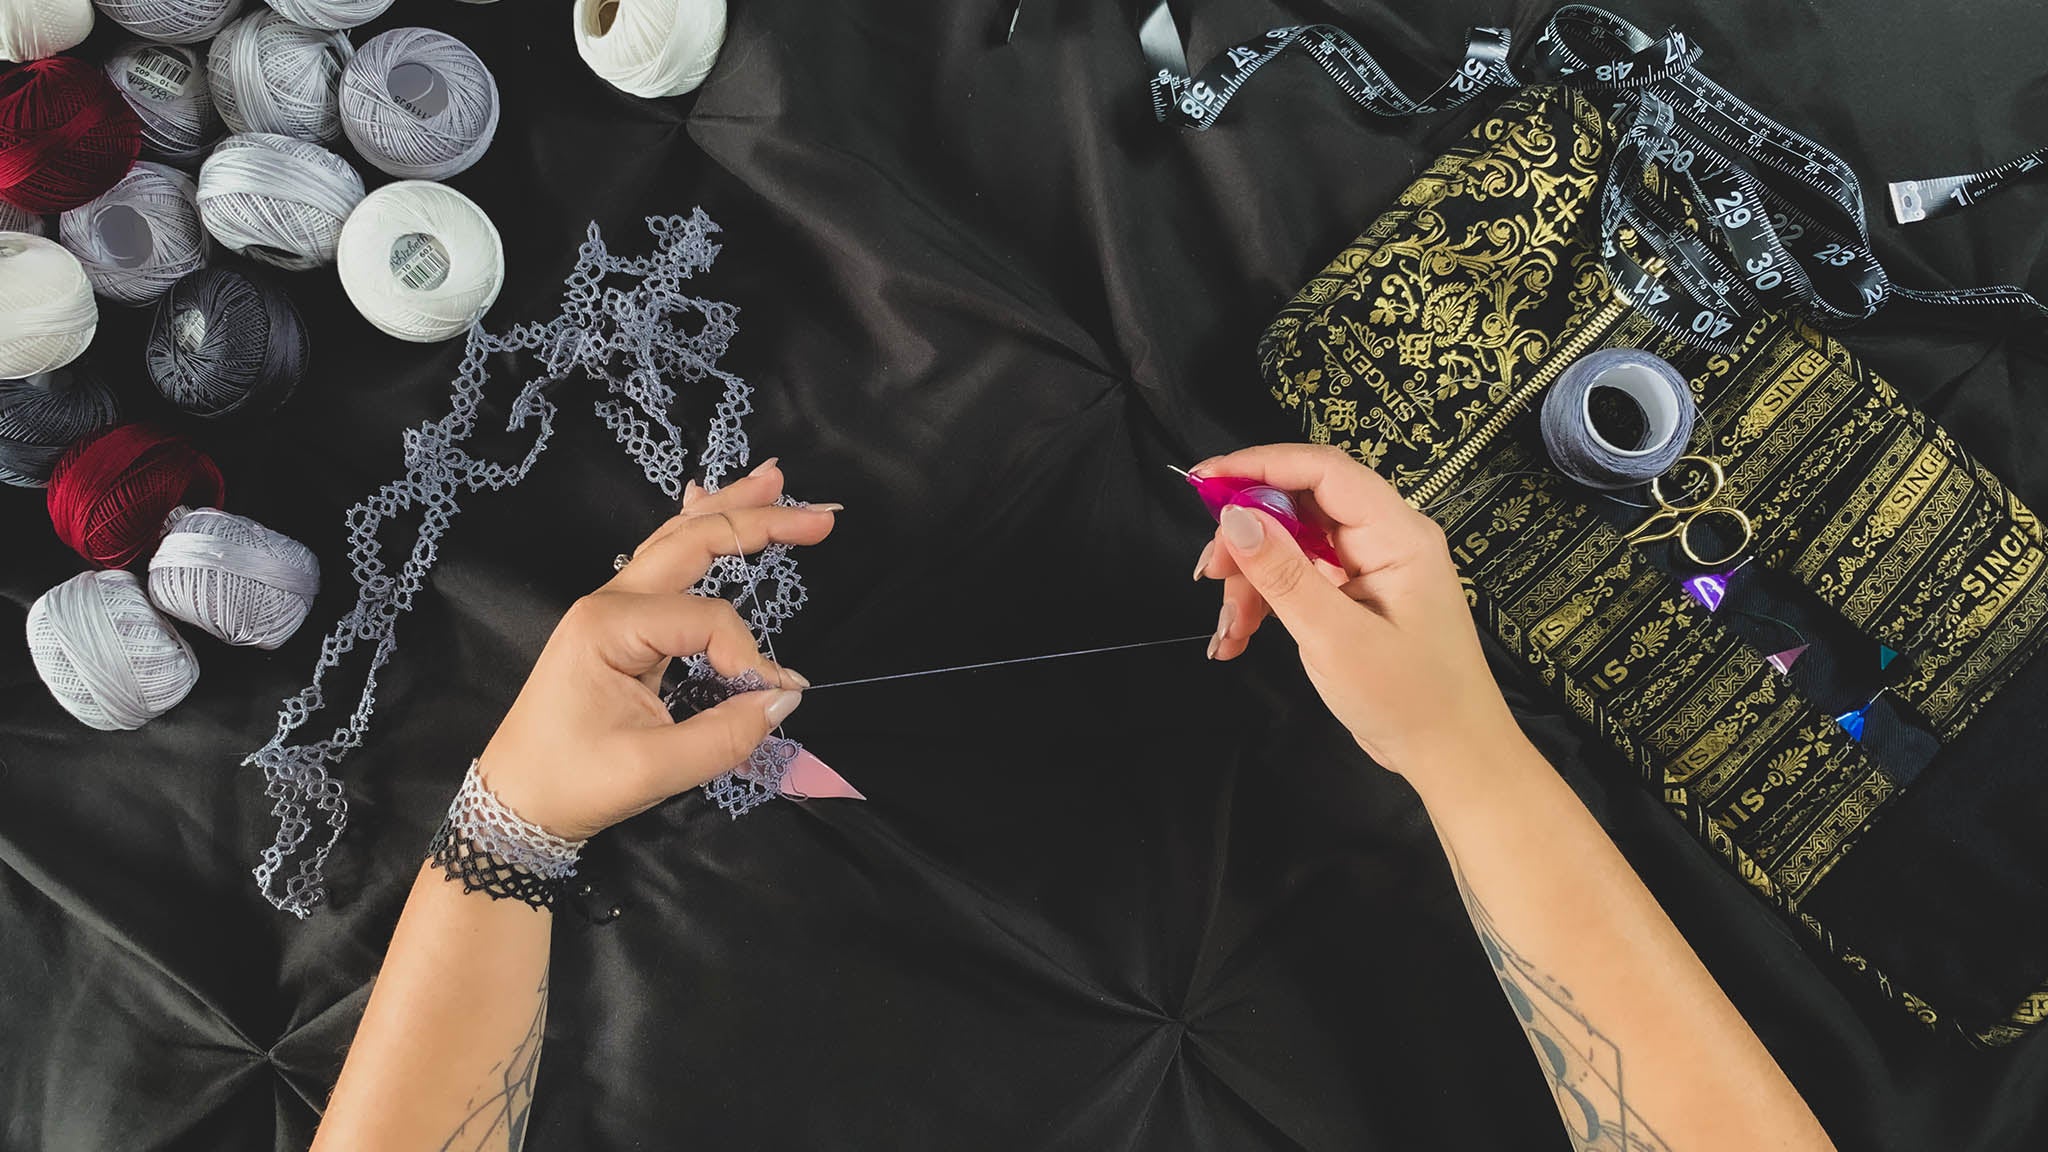 Do you know what tatting is? What its used for? We explain that